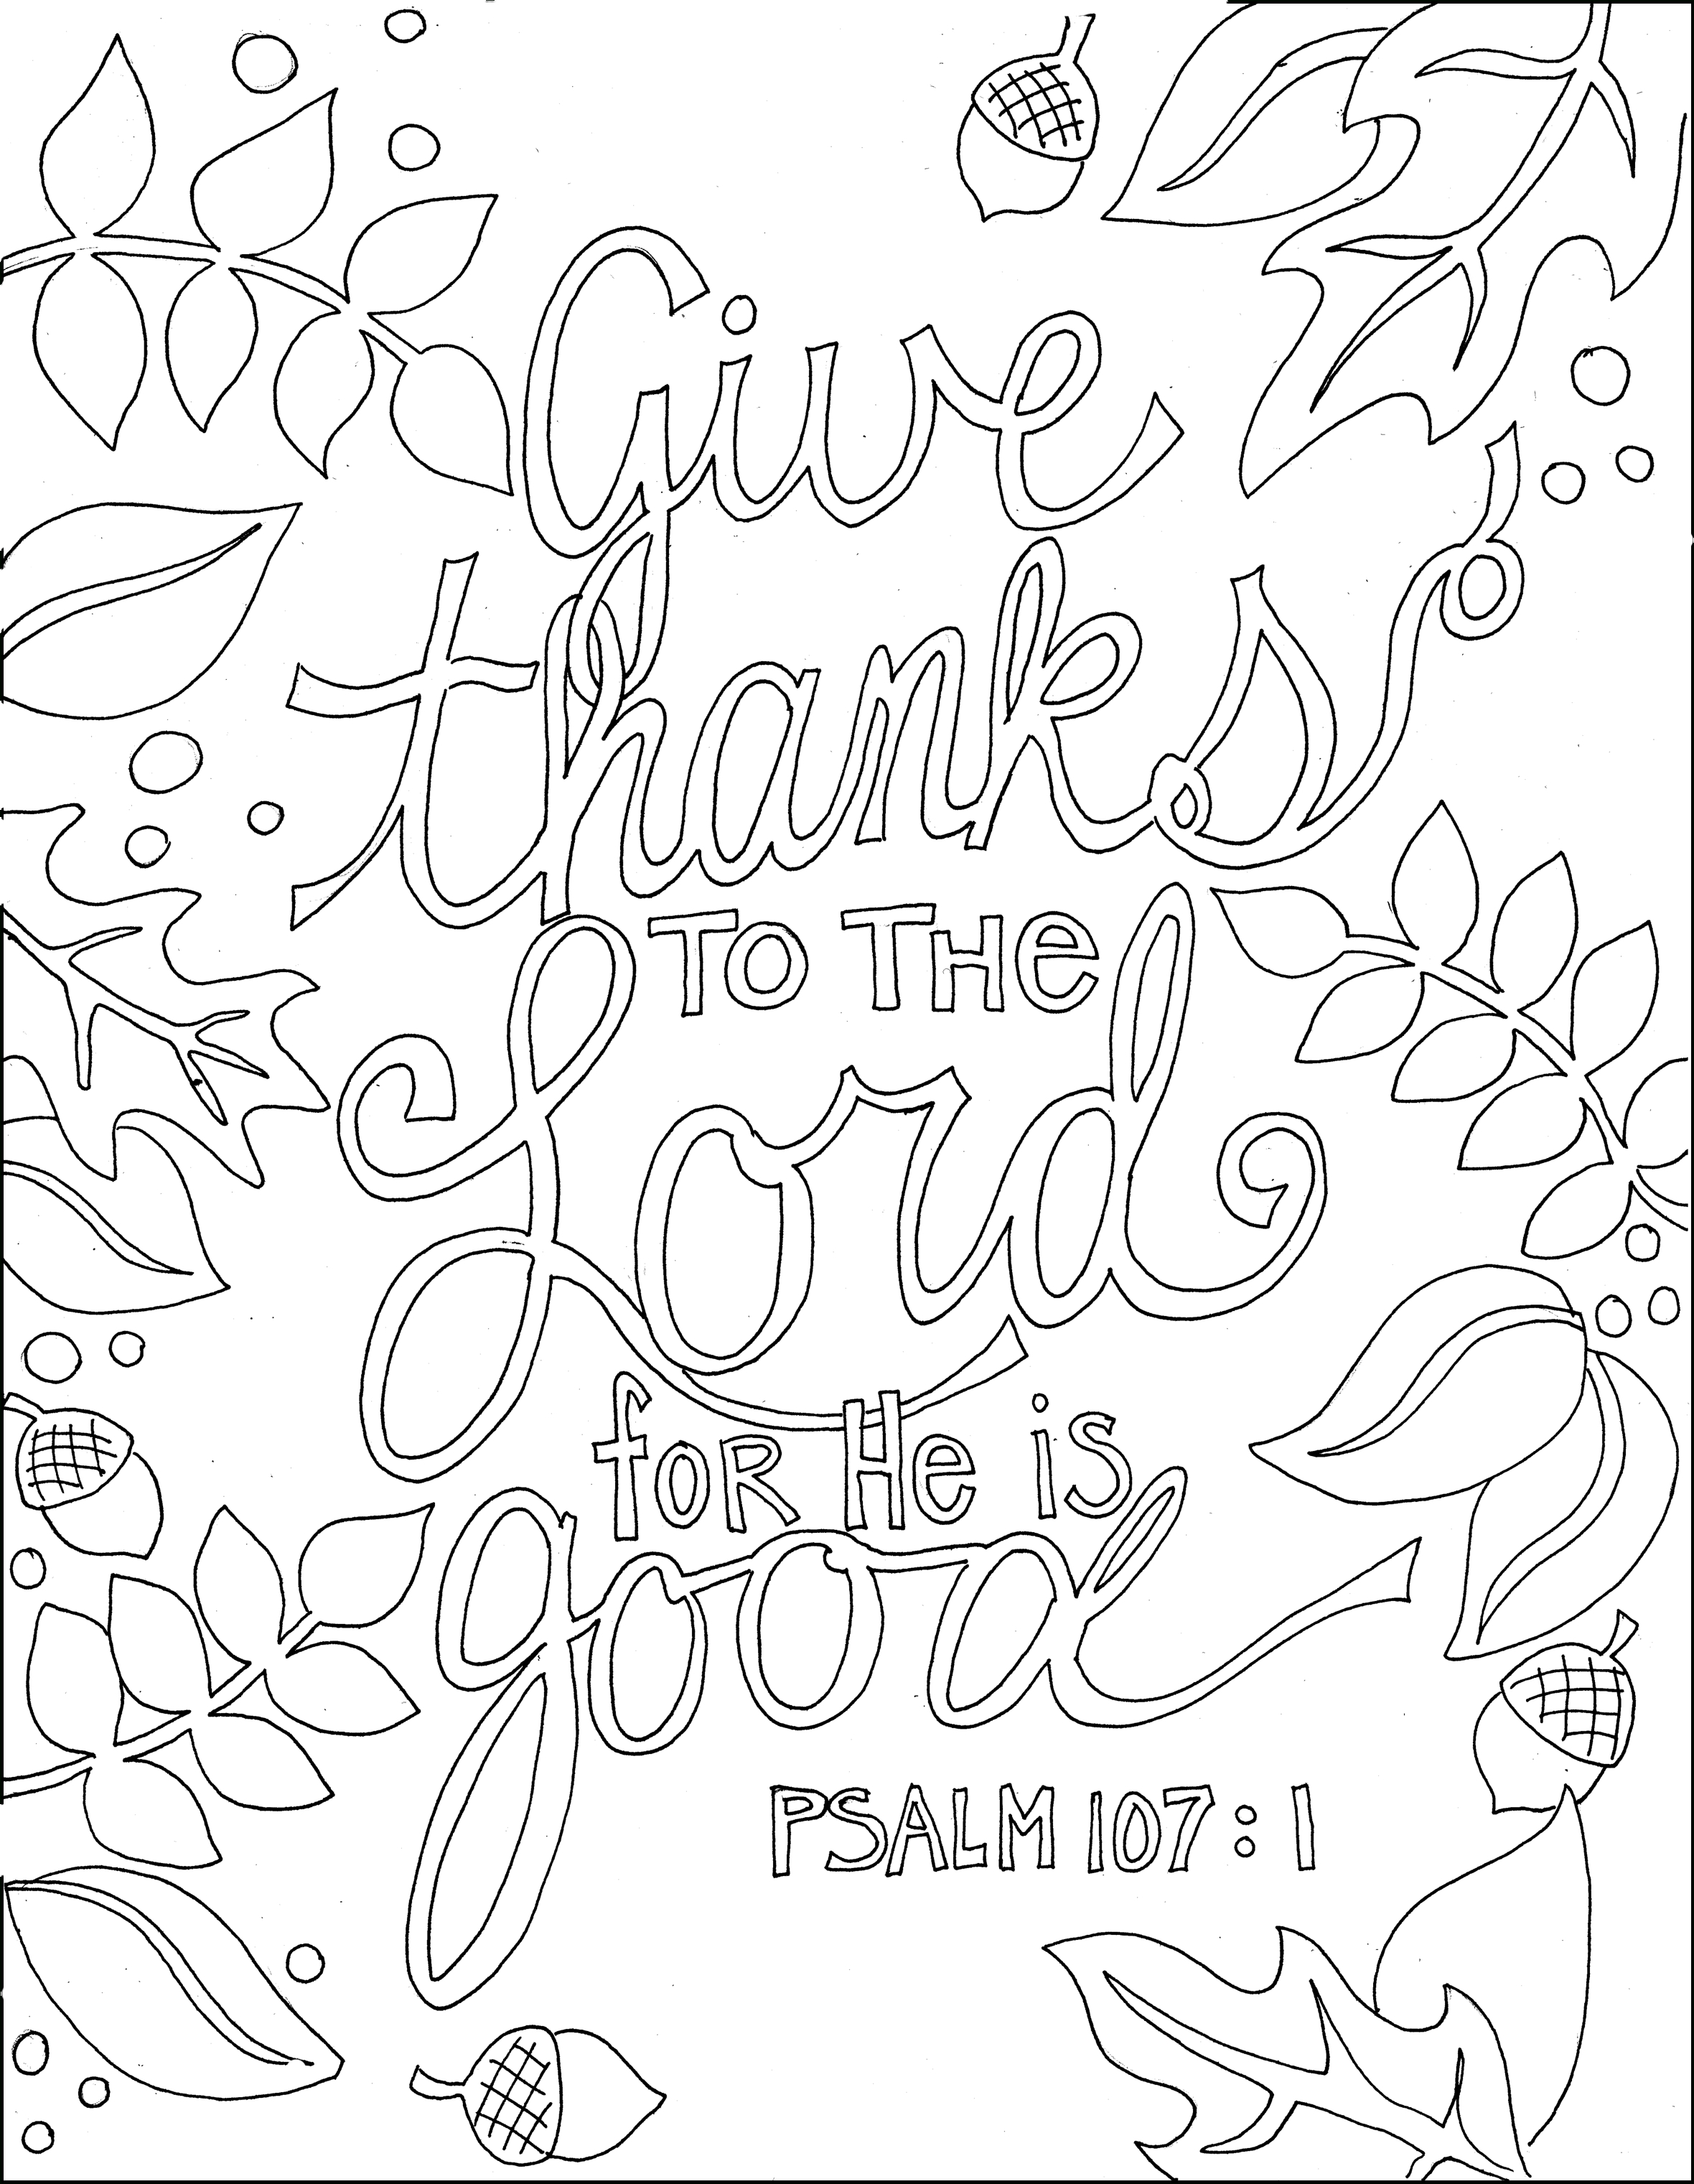 Ps 107.1 | Crafts, Arts | Printable Bible Verses, Bible Verse - Free Printable Bible Coloring Pages With Scriptures